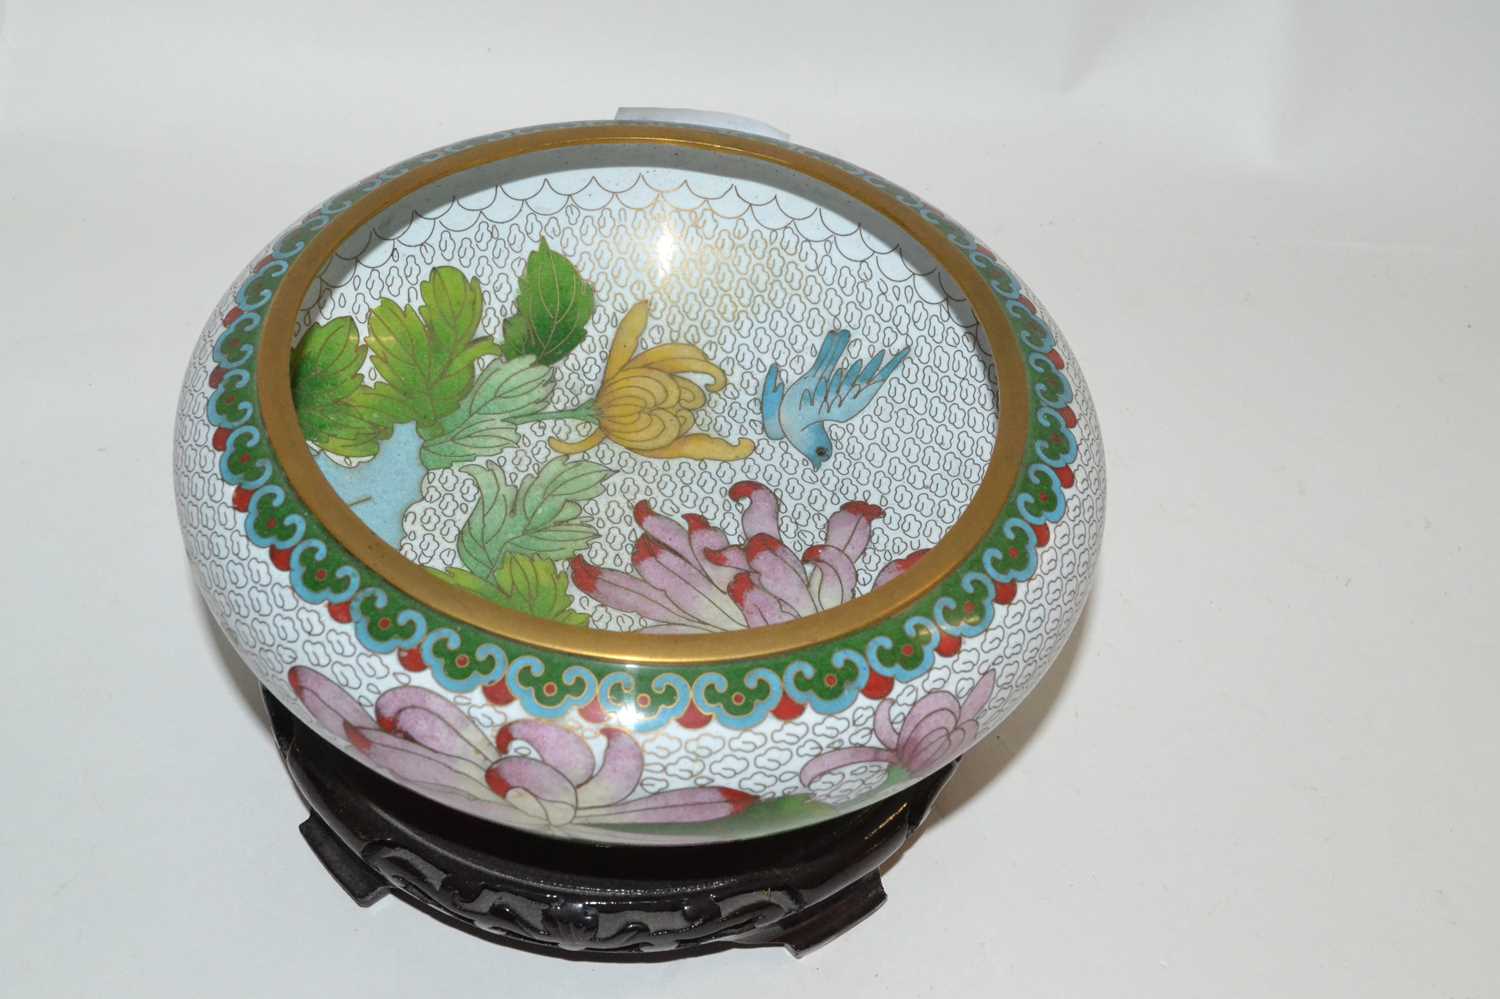 A modern Cloisonne bowl and stand, the bowl decorated with a floral design, 18cm high